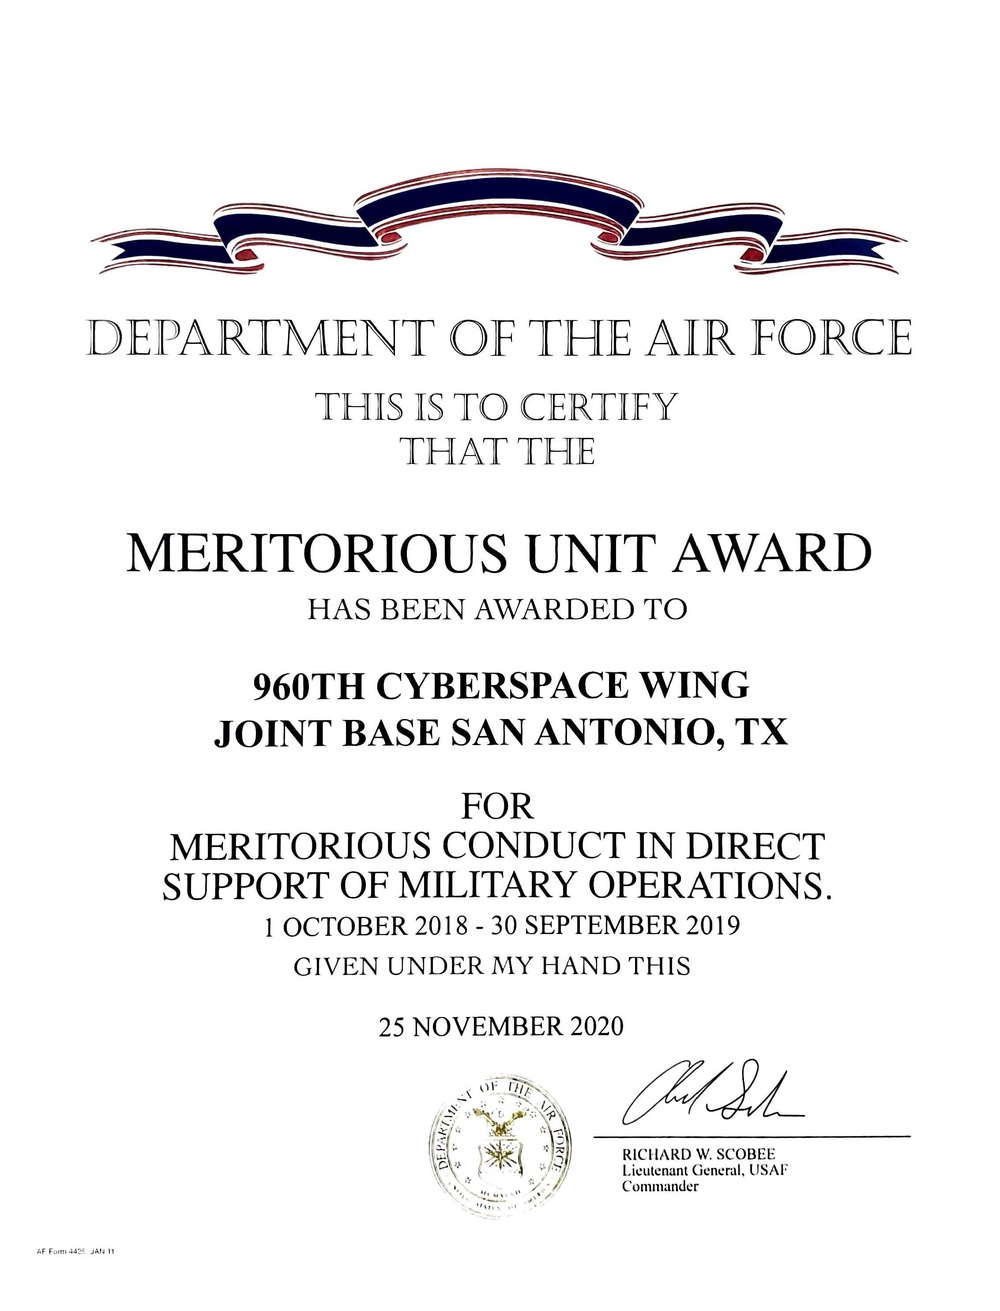 960th Cyberspace Wing awarded Meritorious Unit Award